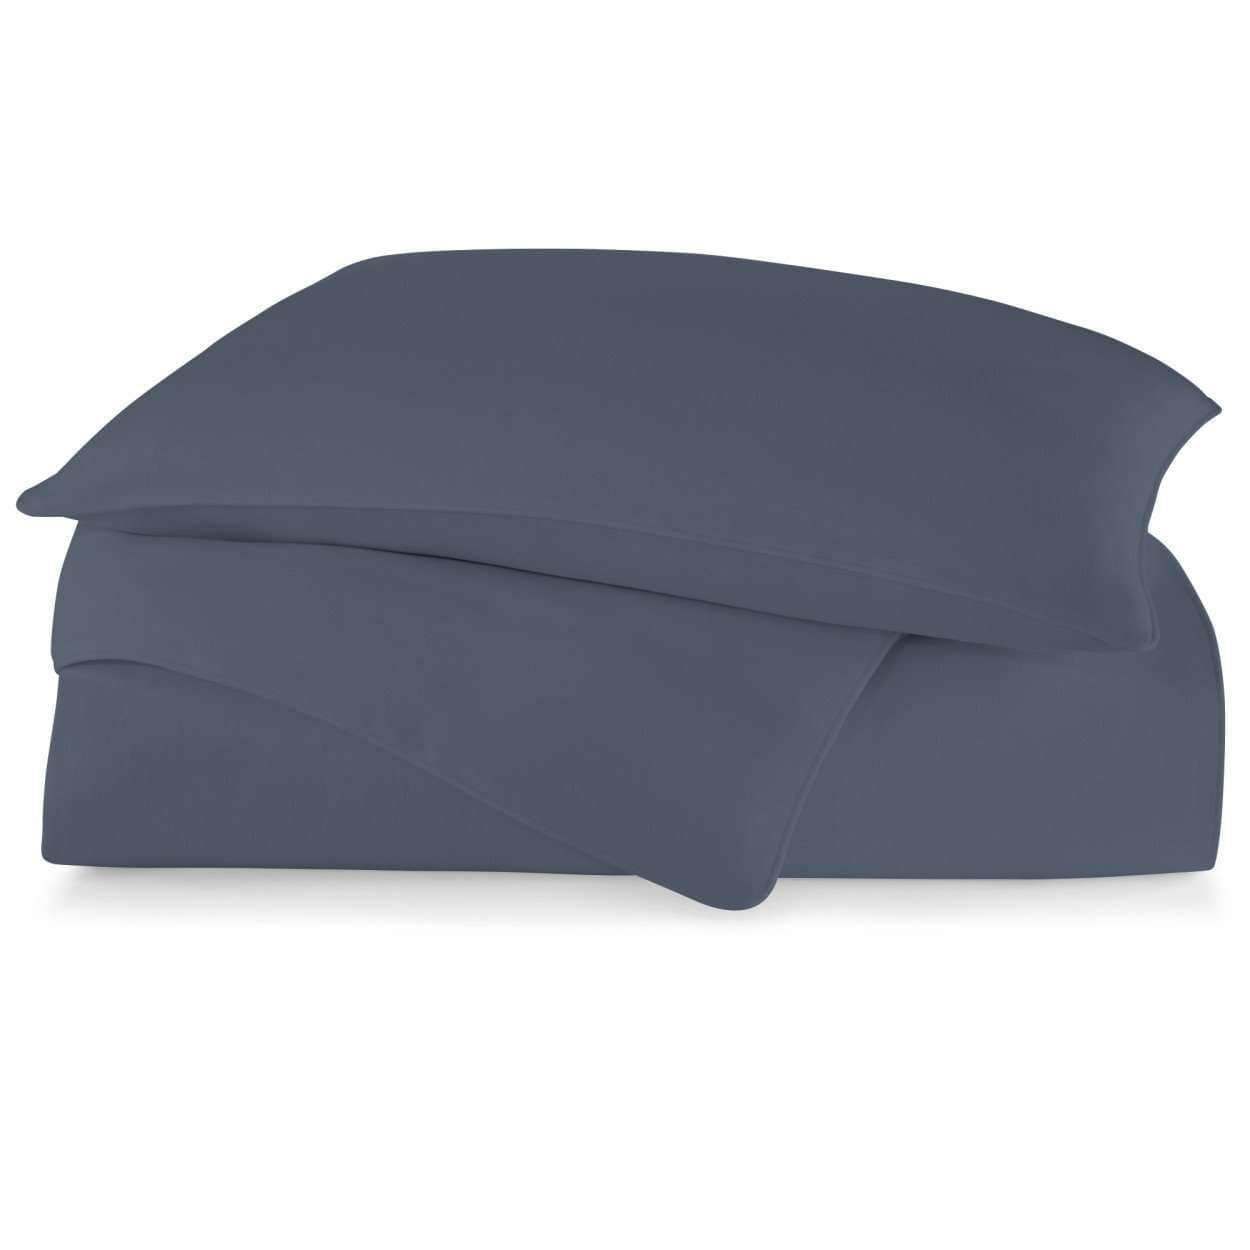 Duvet Covers Mandalay Linen Duvet by Peacock Alley Twin 68x90 / Navy Peacock Alley